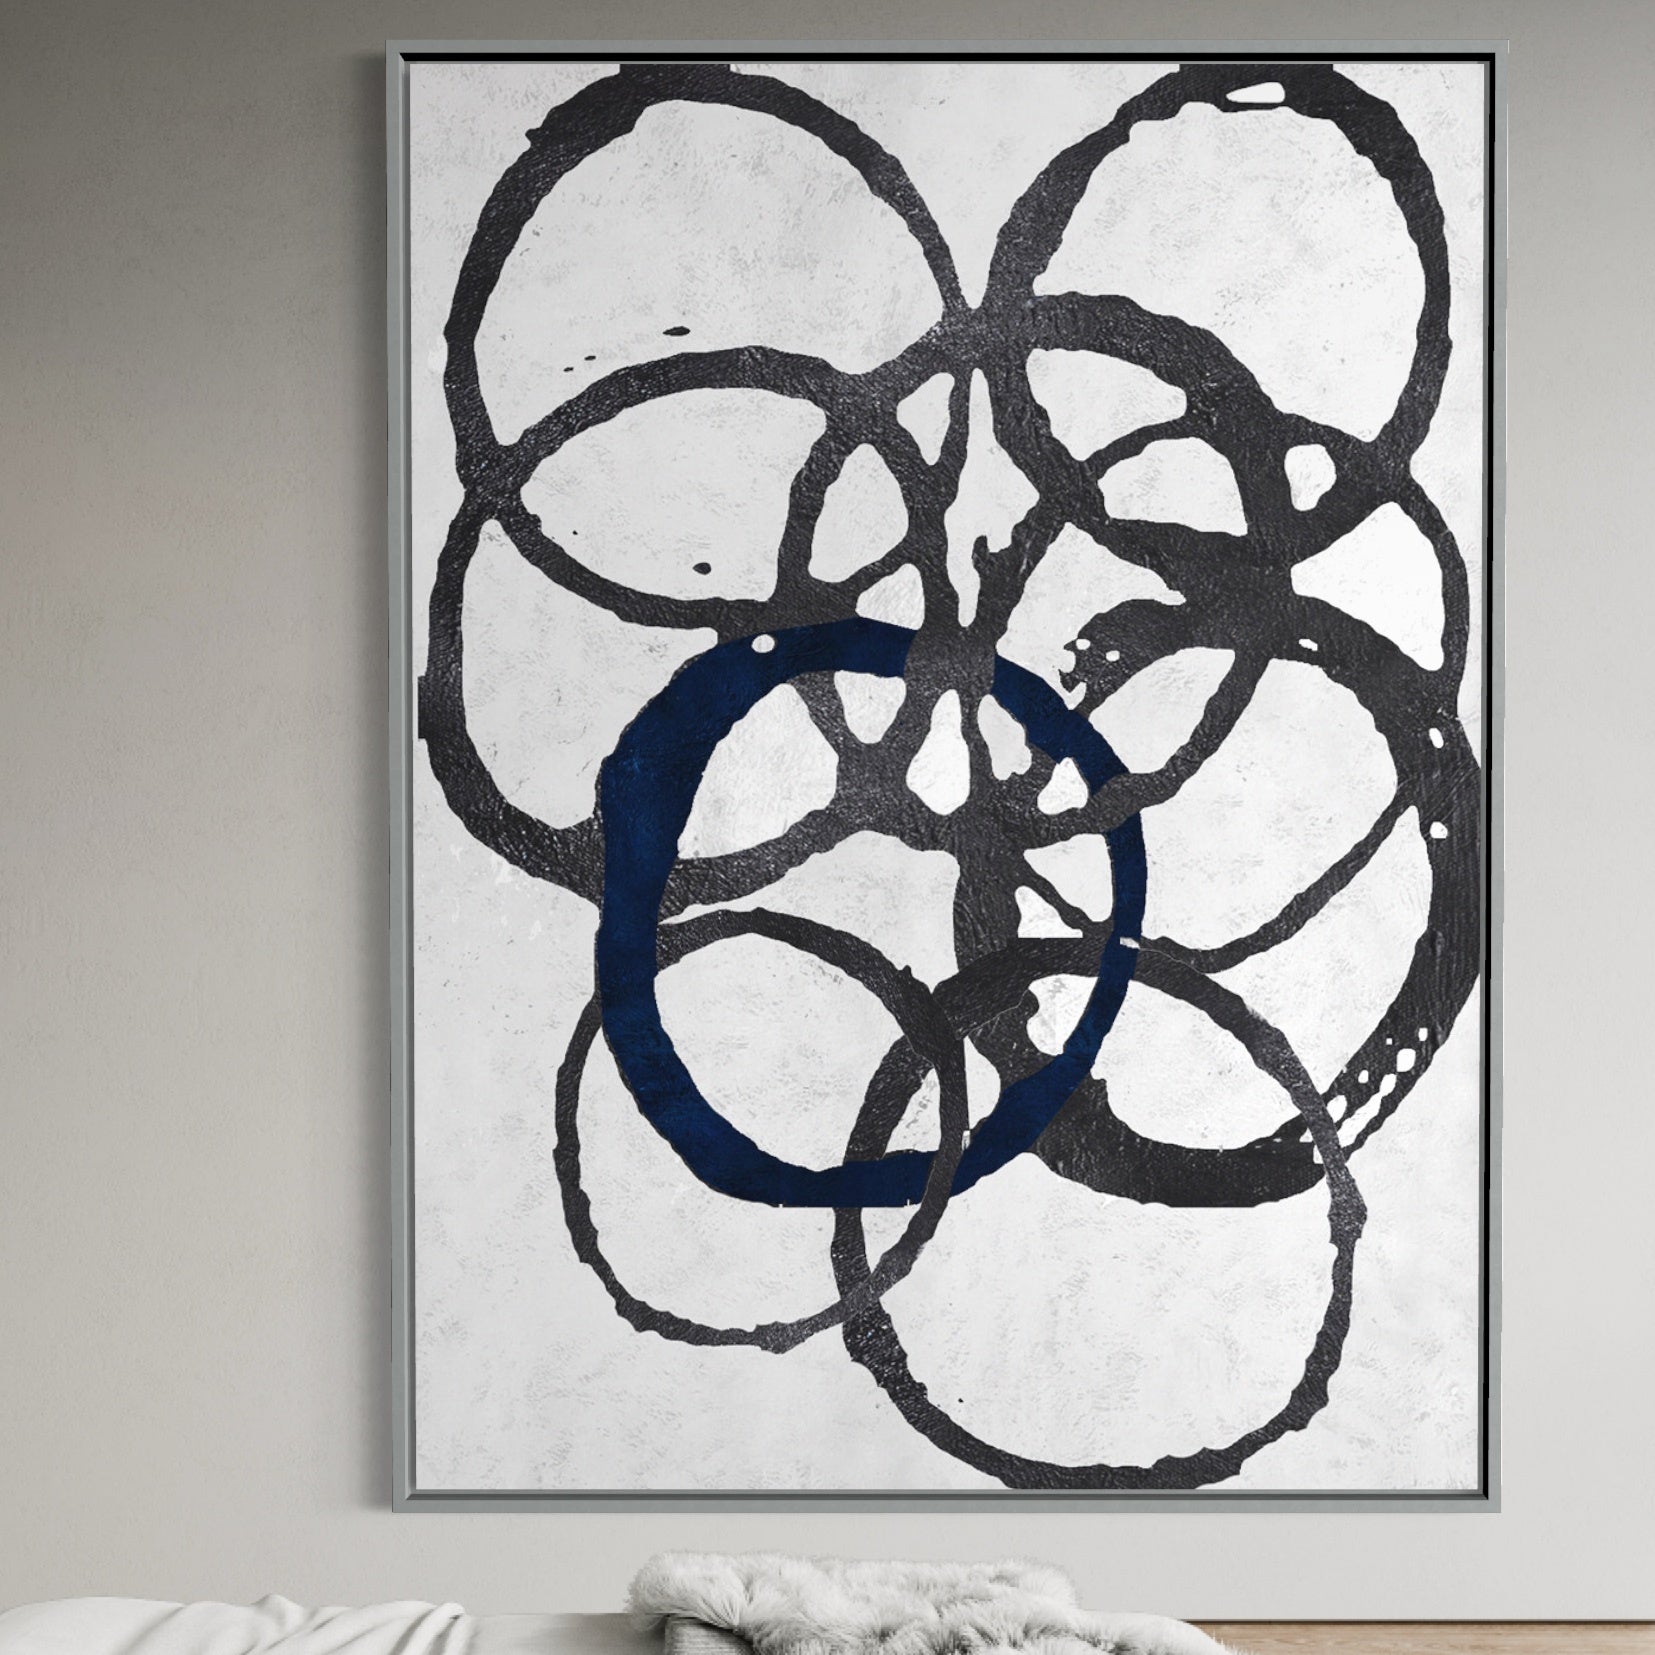 Circles And Charcoal, Gallery Wrap (With Bleed) / 75x100cm